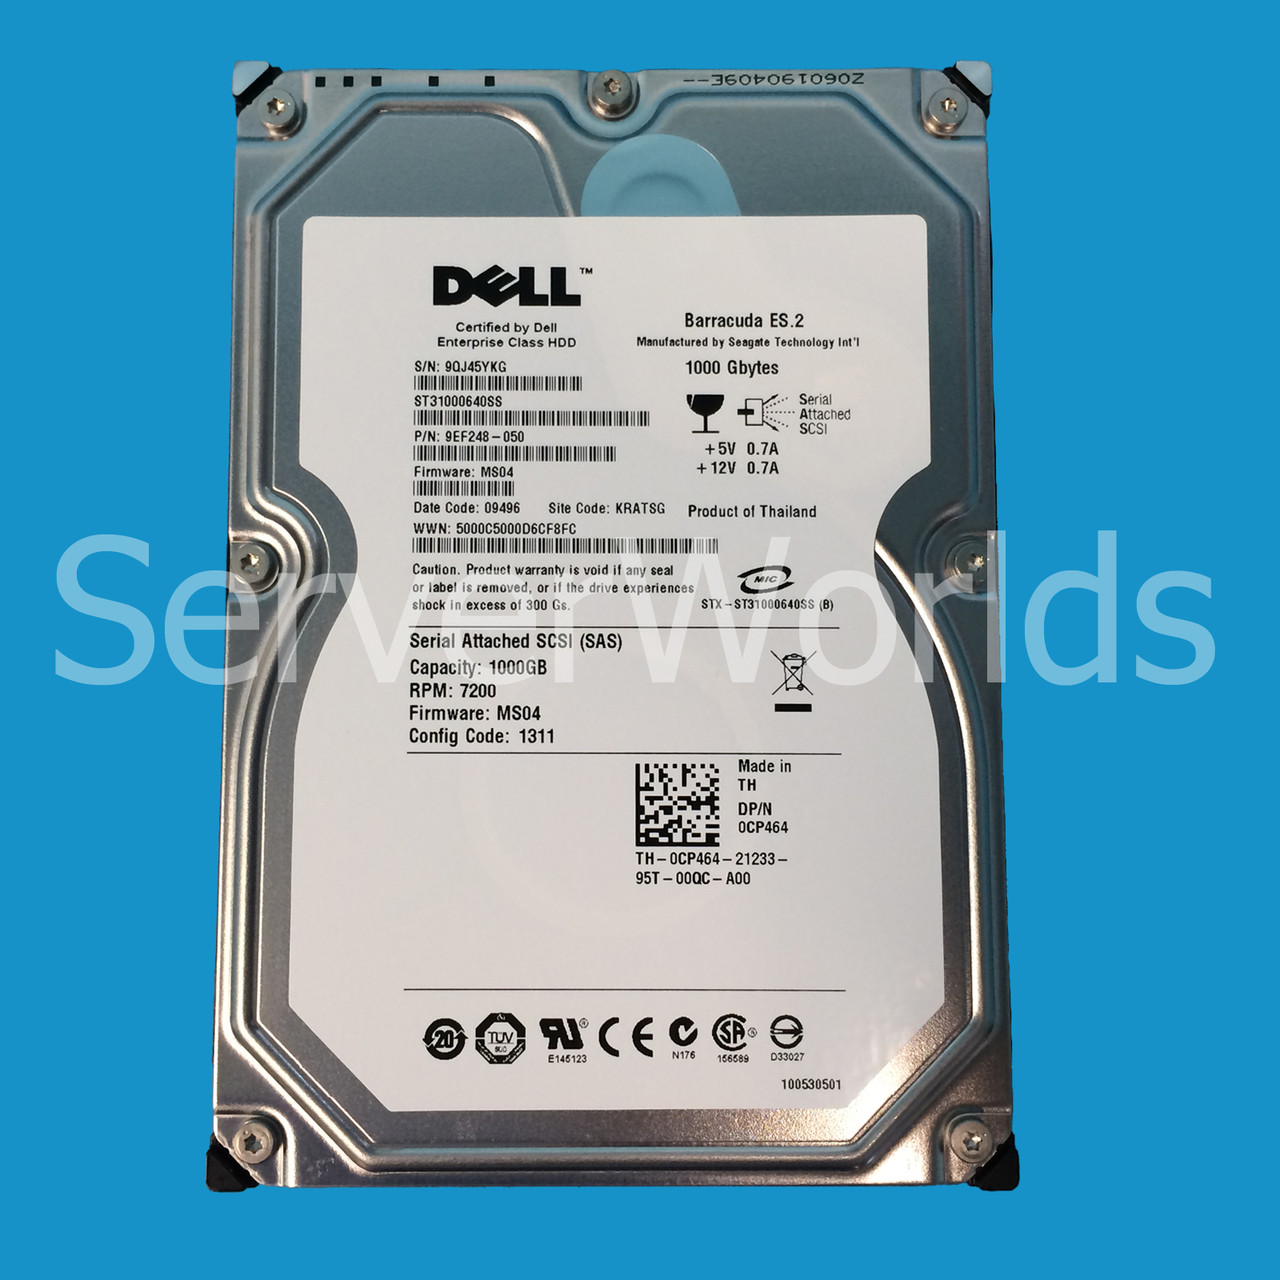 Dell CP464 1TB NL SAS 7.2K 3GBPS 3.5" Drive 9EF248-050 ST31000640SS